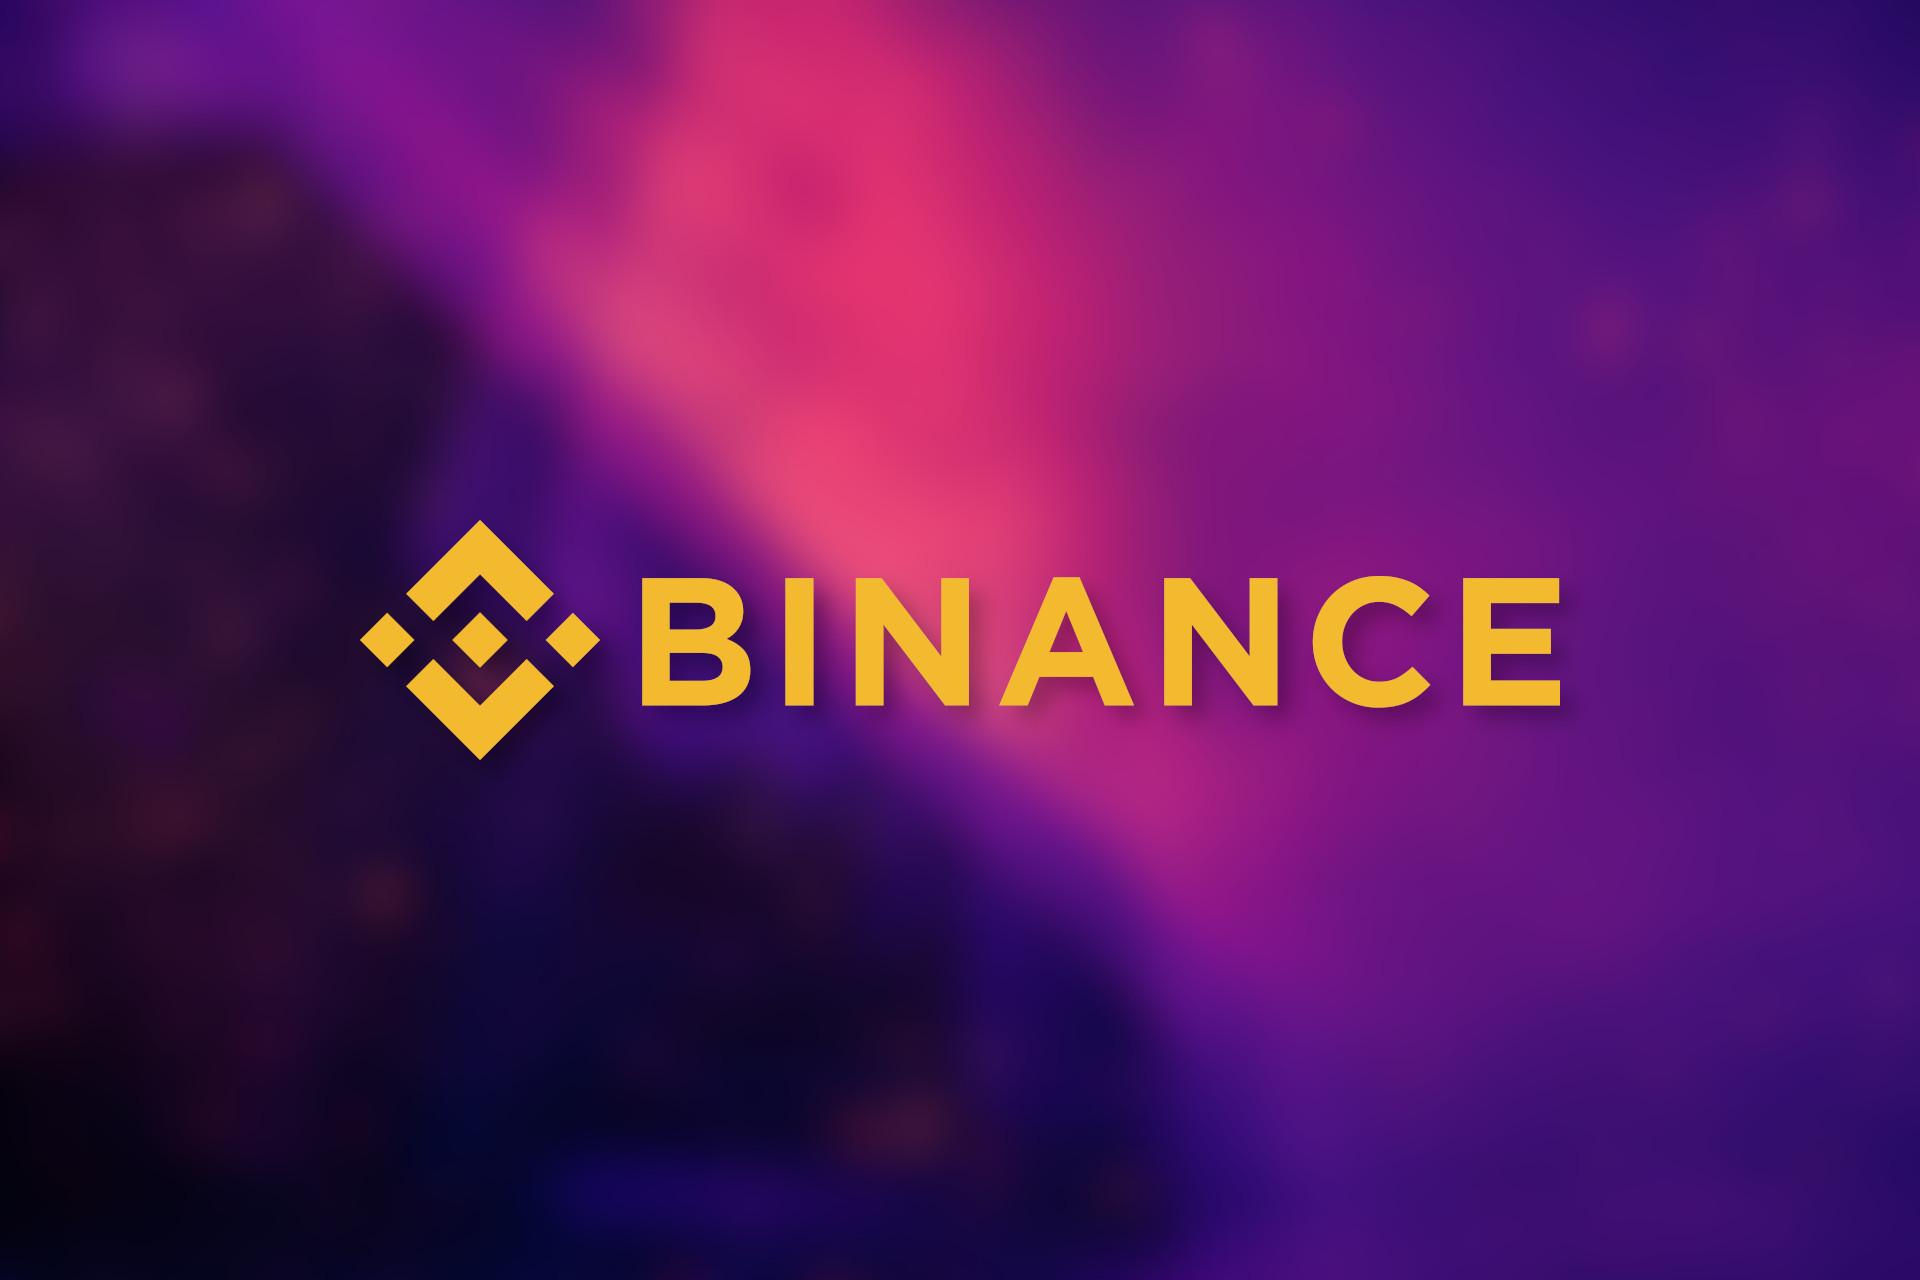 Binance crpytocurrency exchnage logo image cover